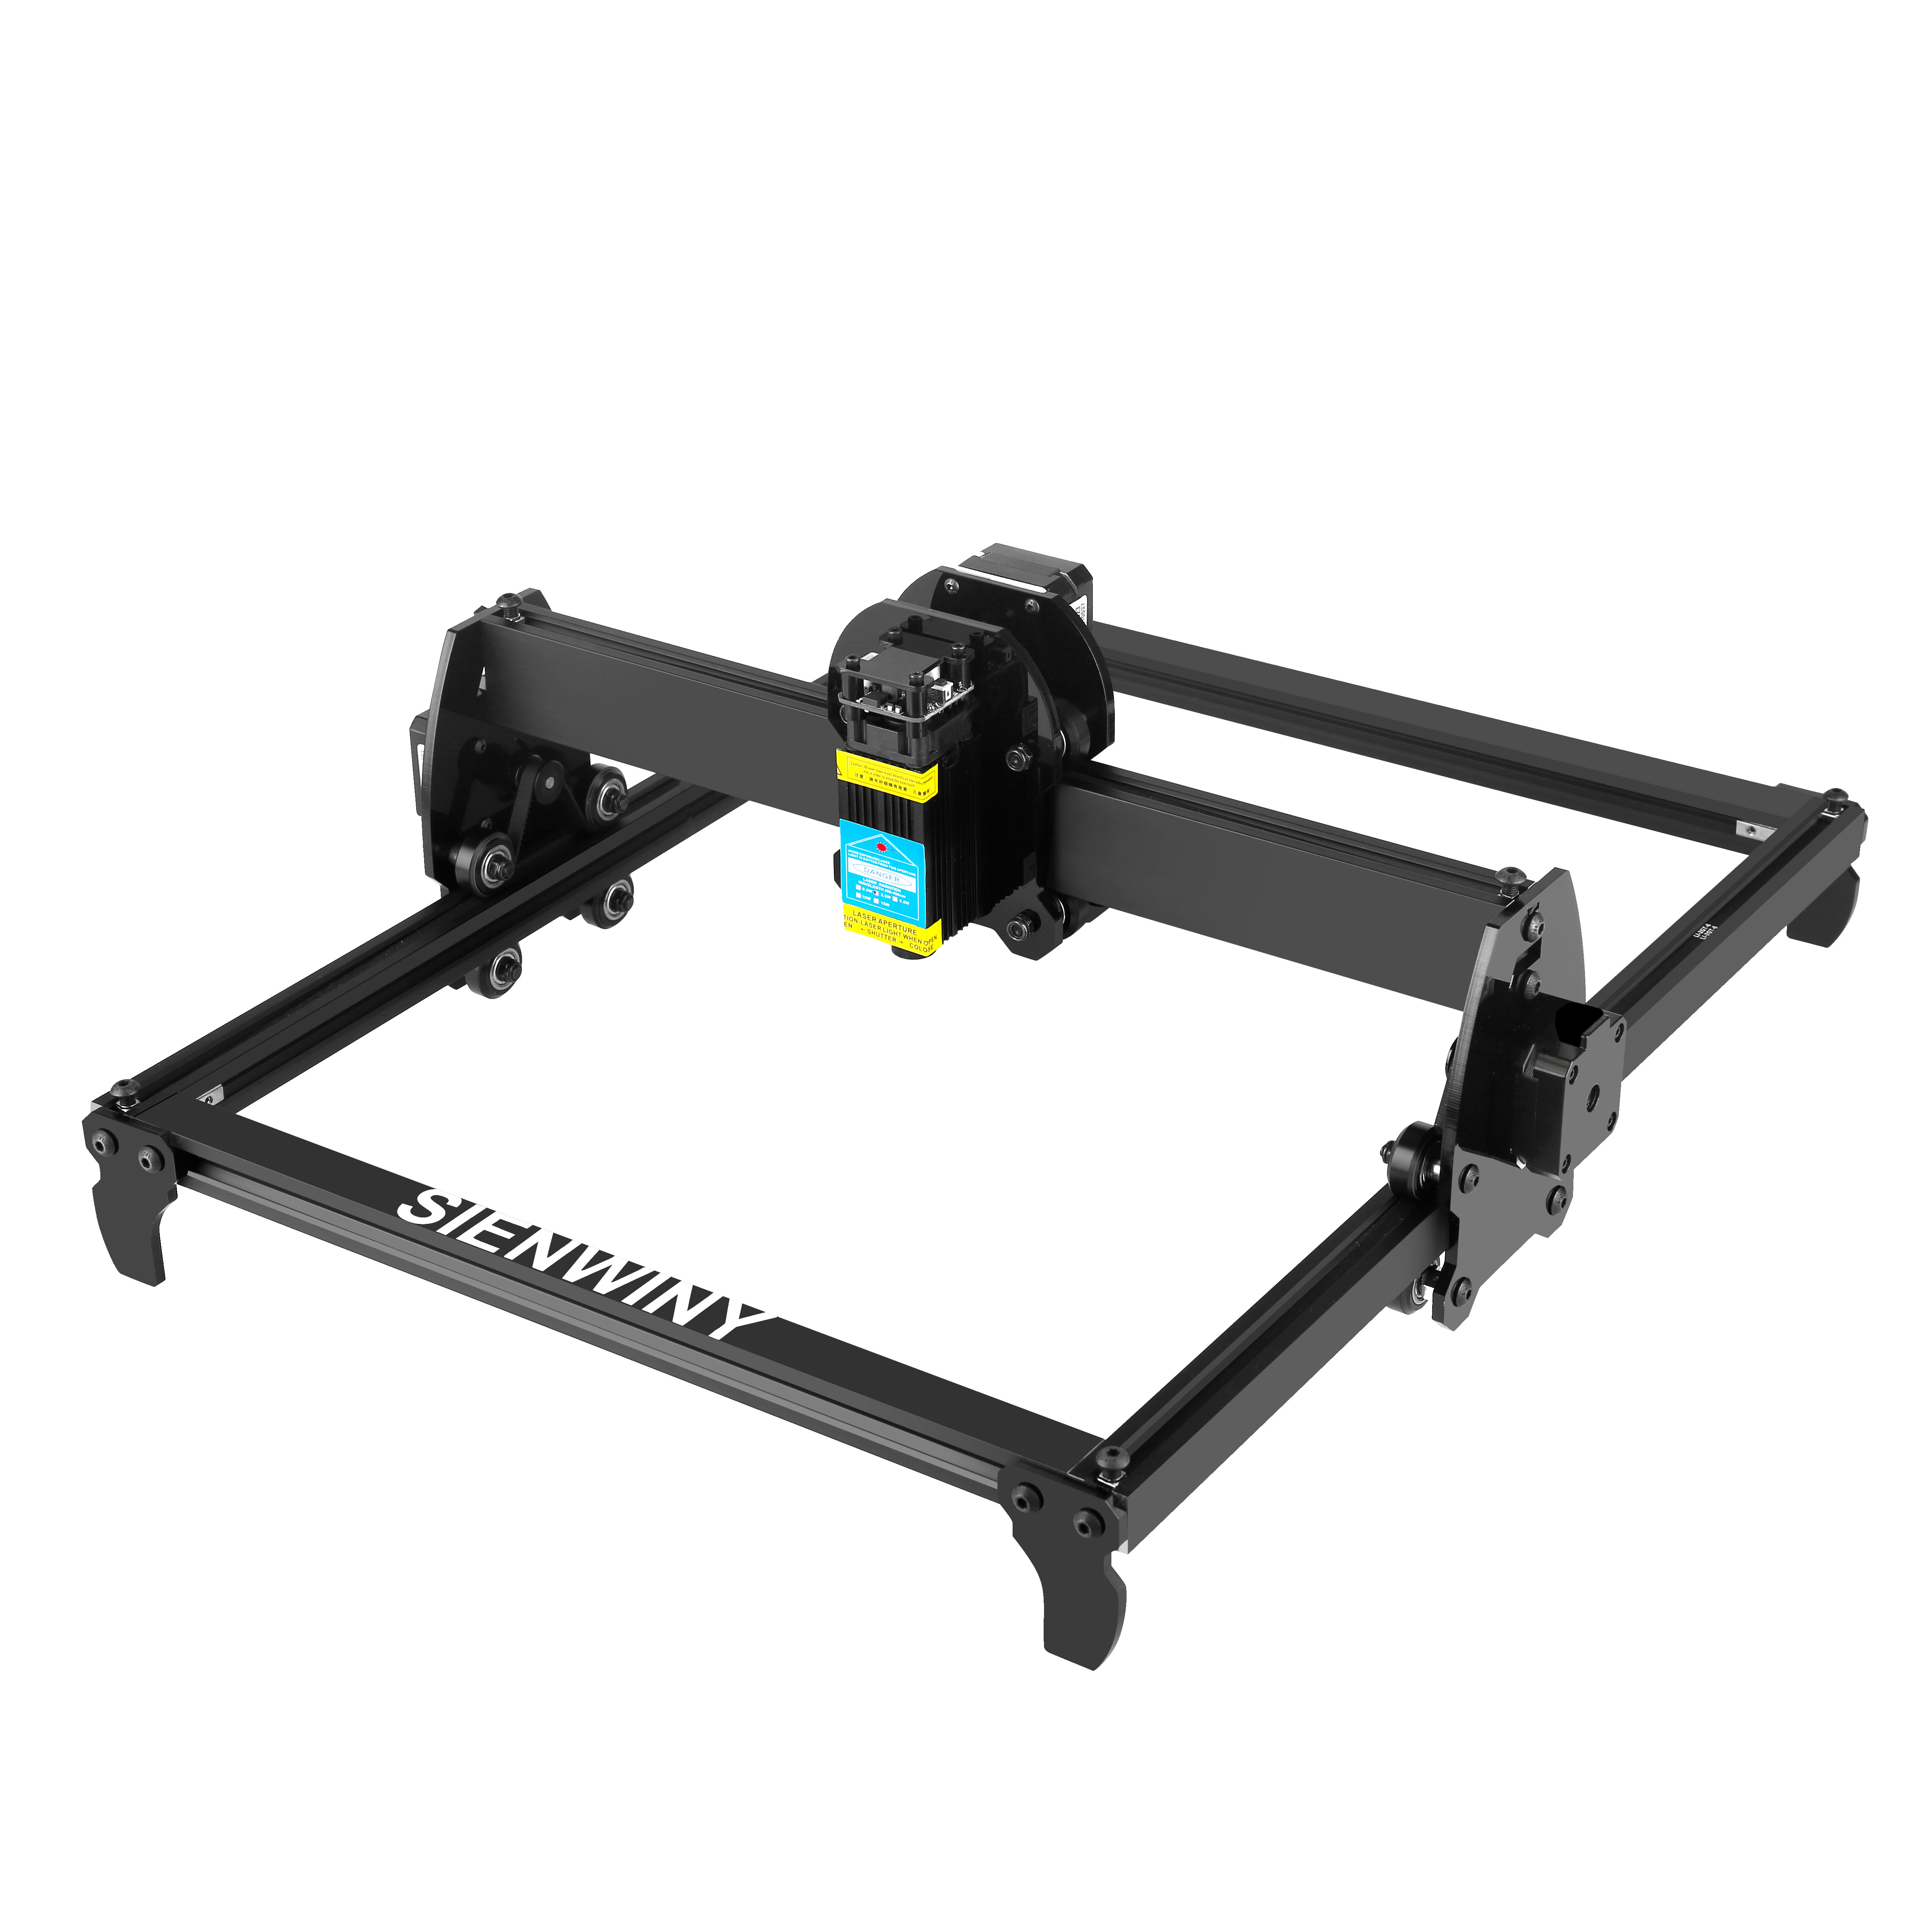 

New SIENWINY 2500mW DIY Laser Engraving Machine Laser Engraver Area CNC Wood Acrylic Laser Cutter Quick Assembly Design